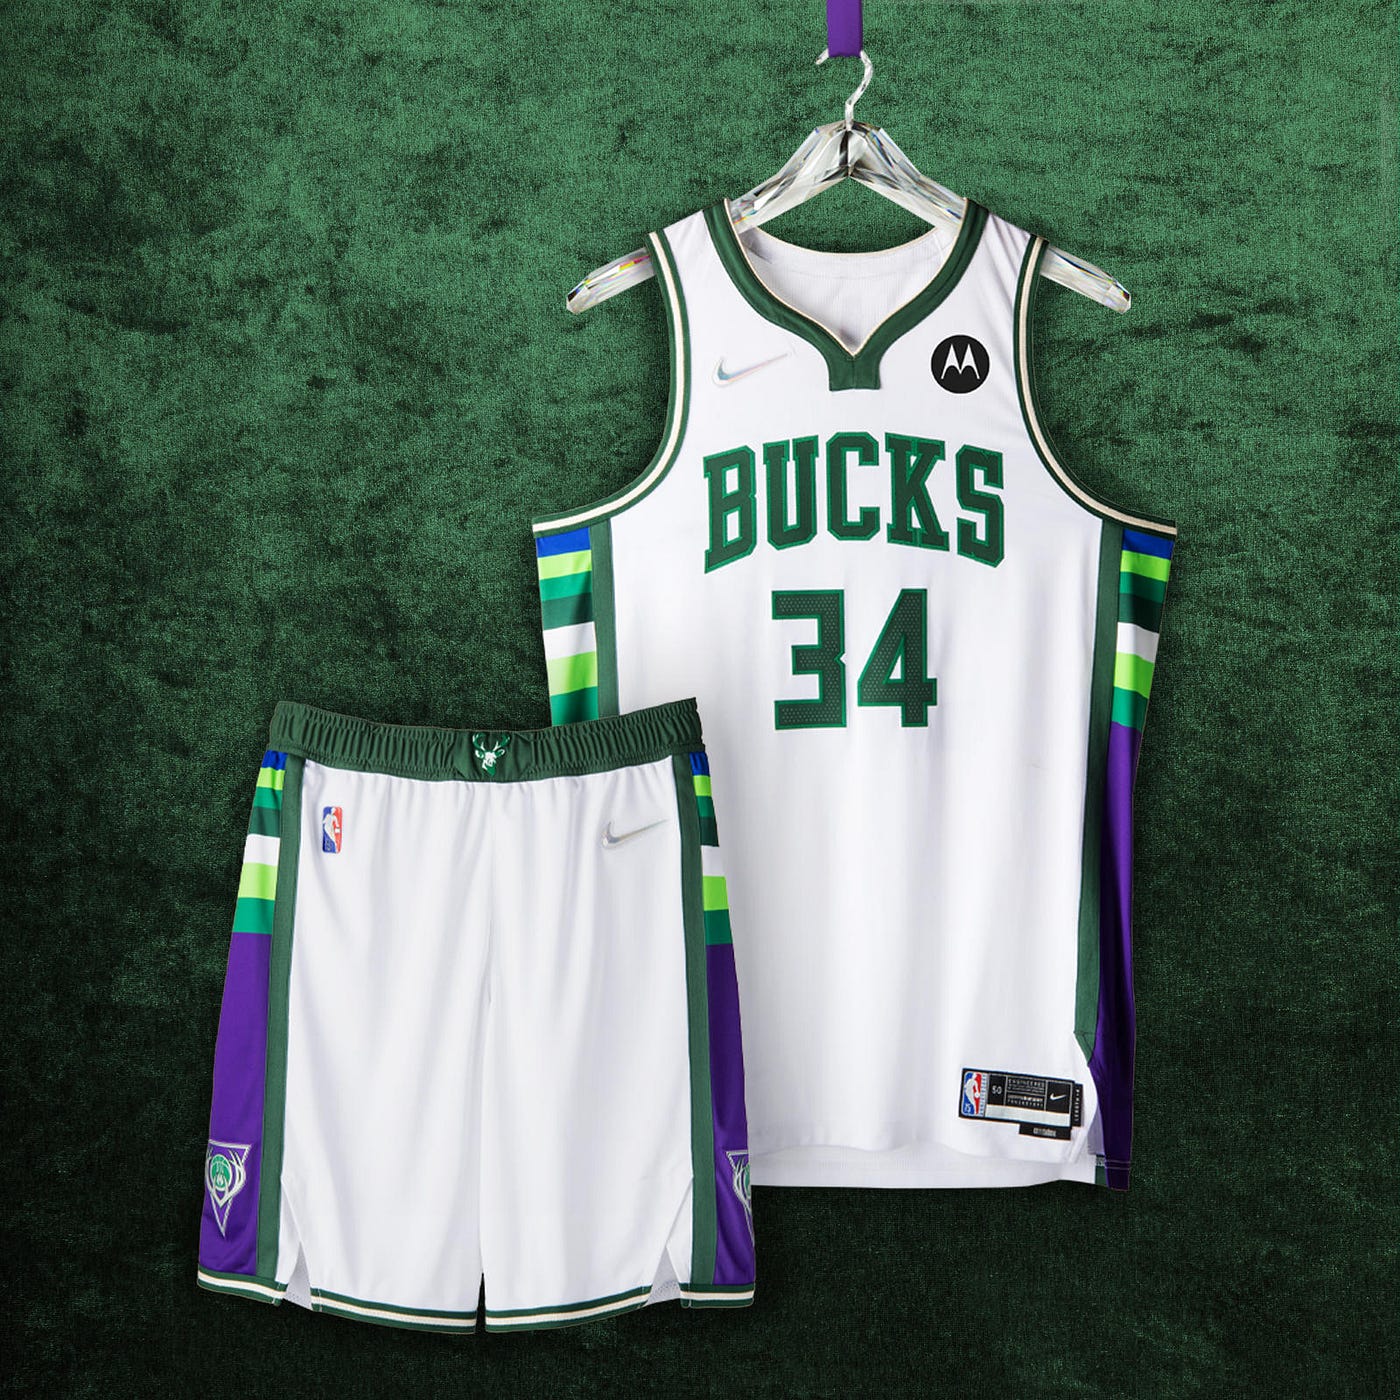 NBA City Edition jerseys 2021-22 ranked best to worst